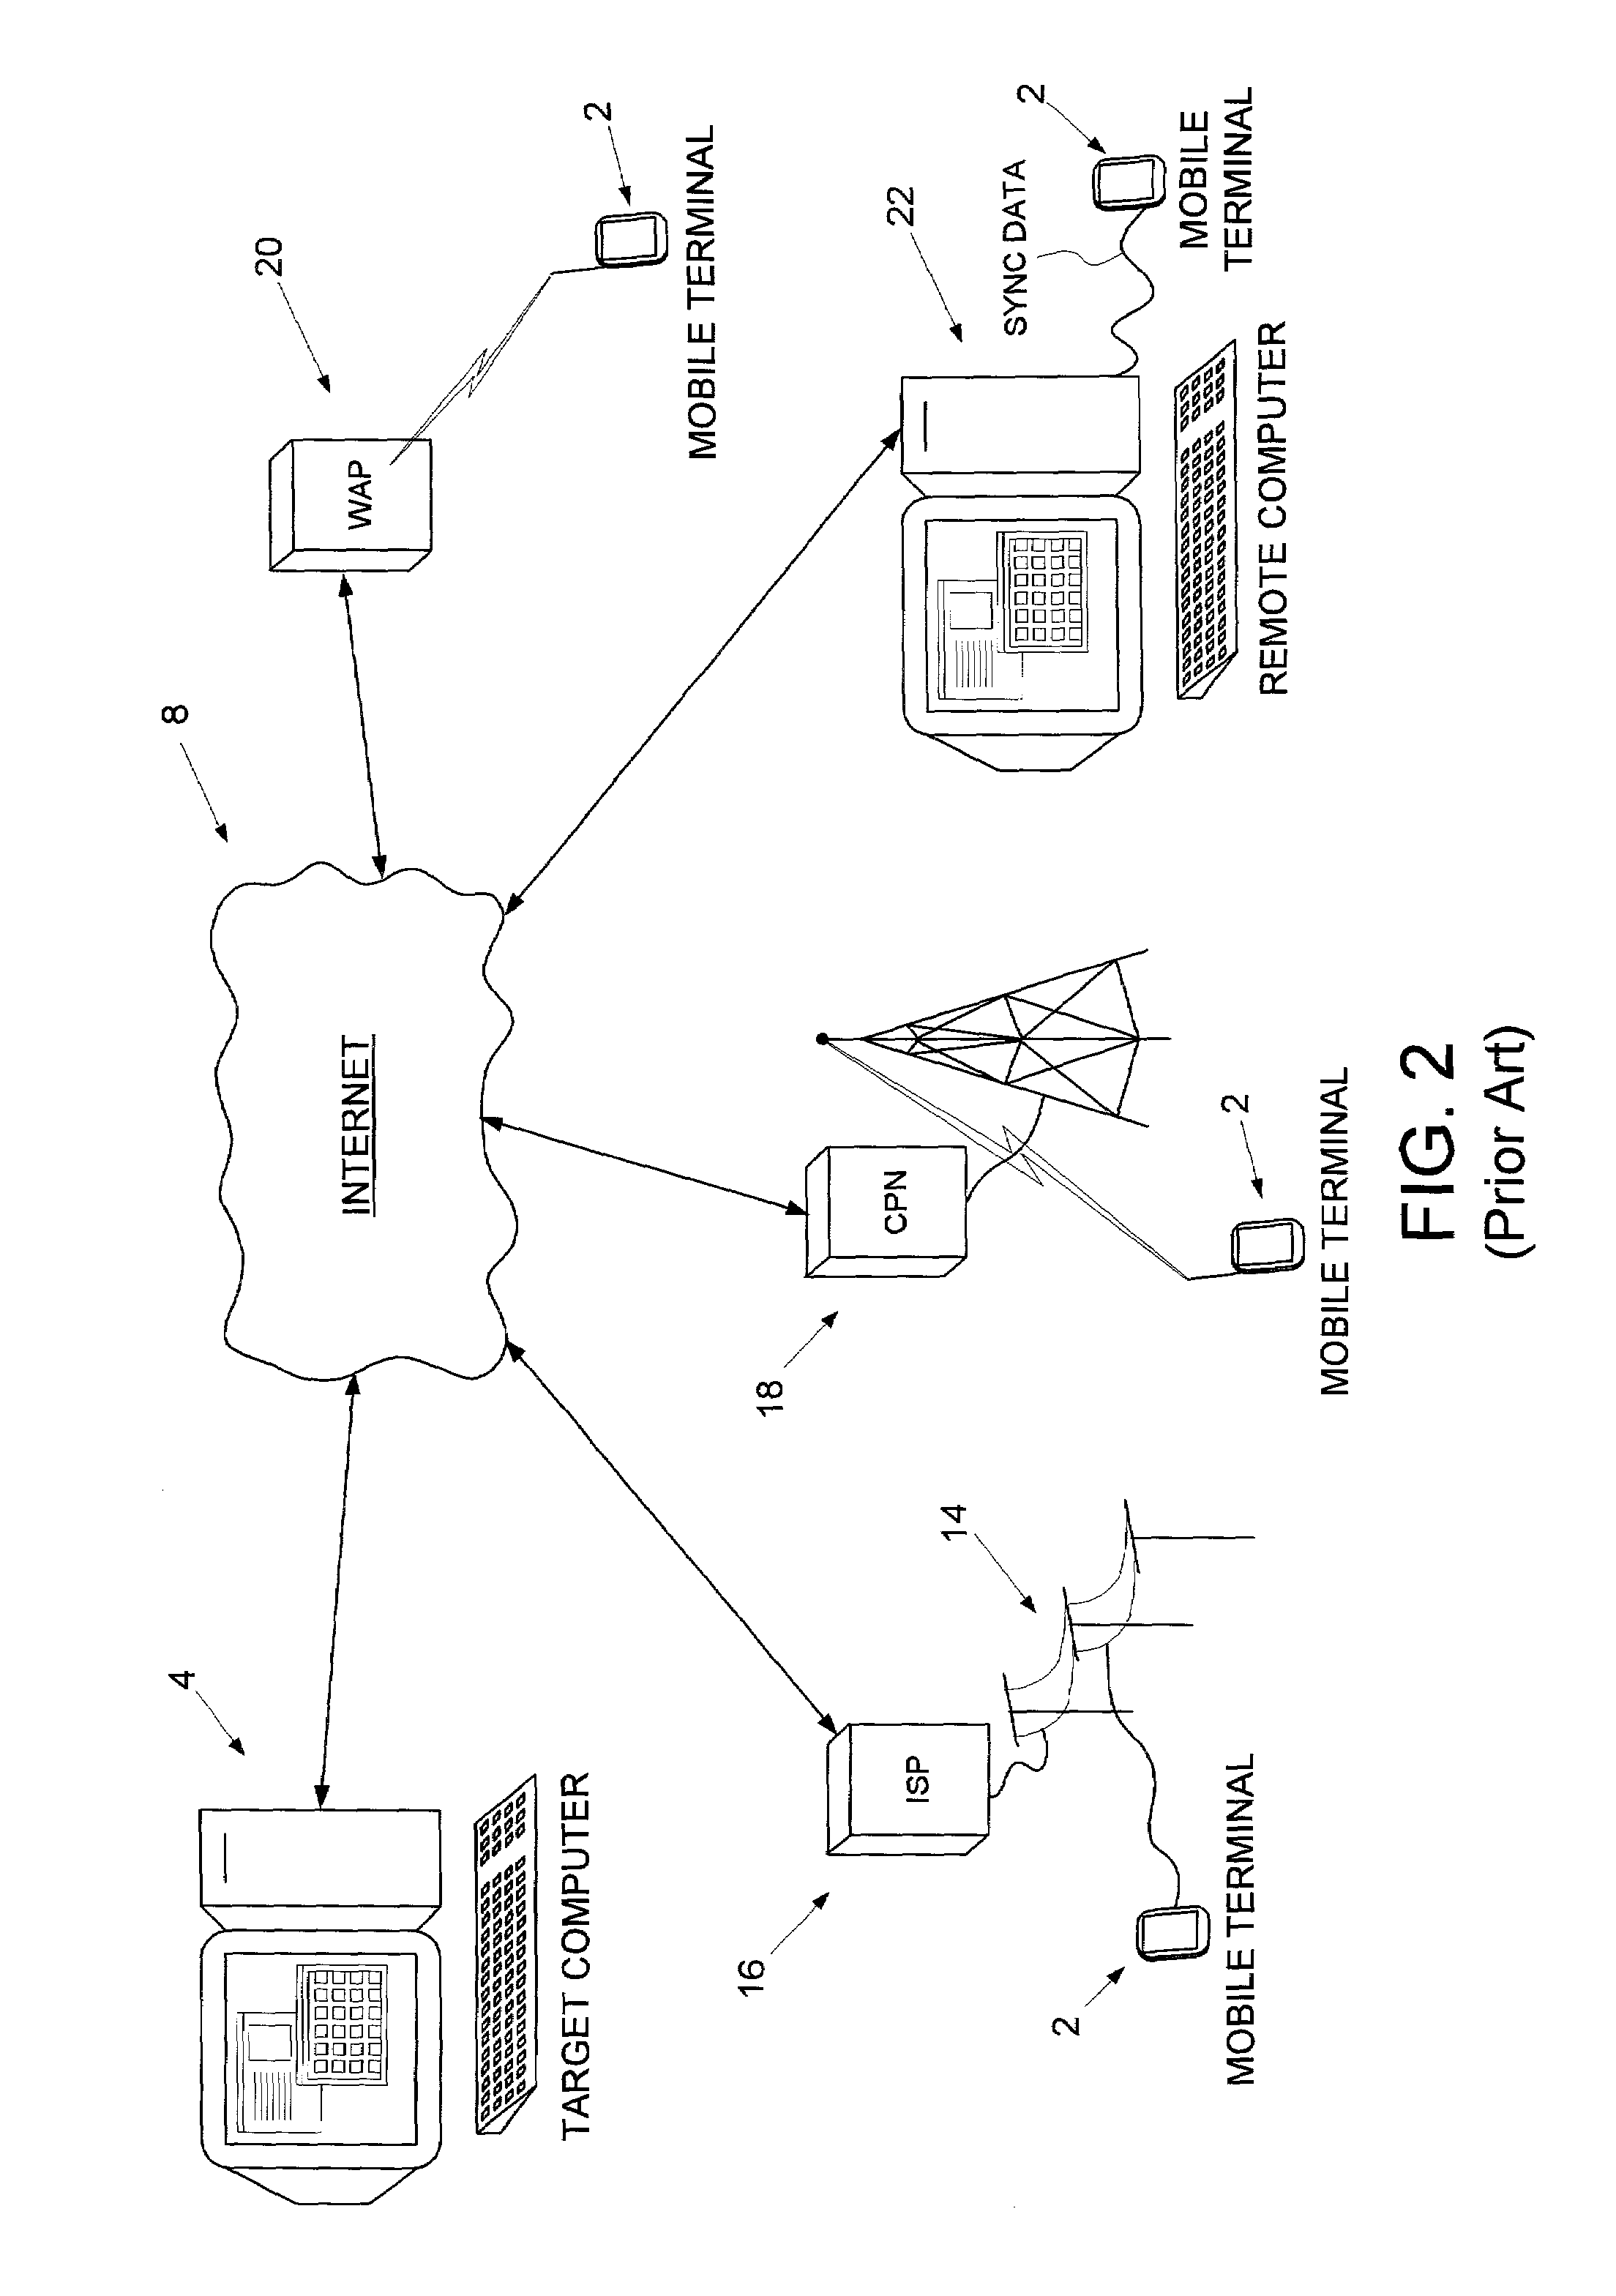 Mobile terminal synchronizing components of a document separately